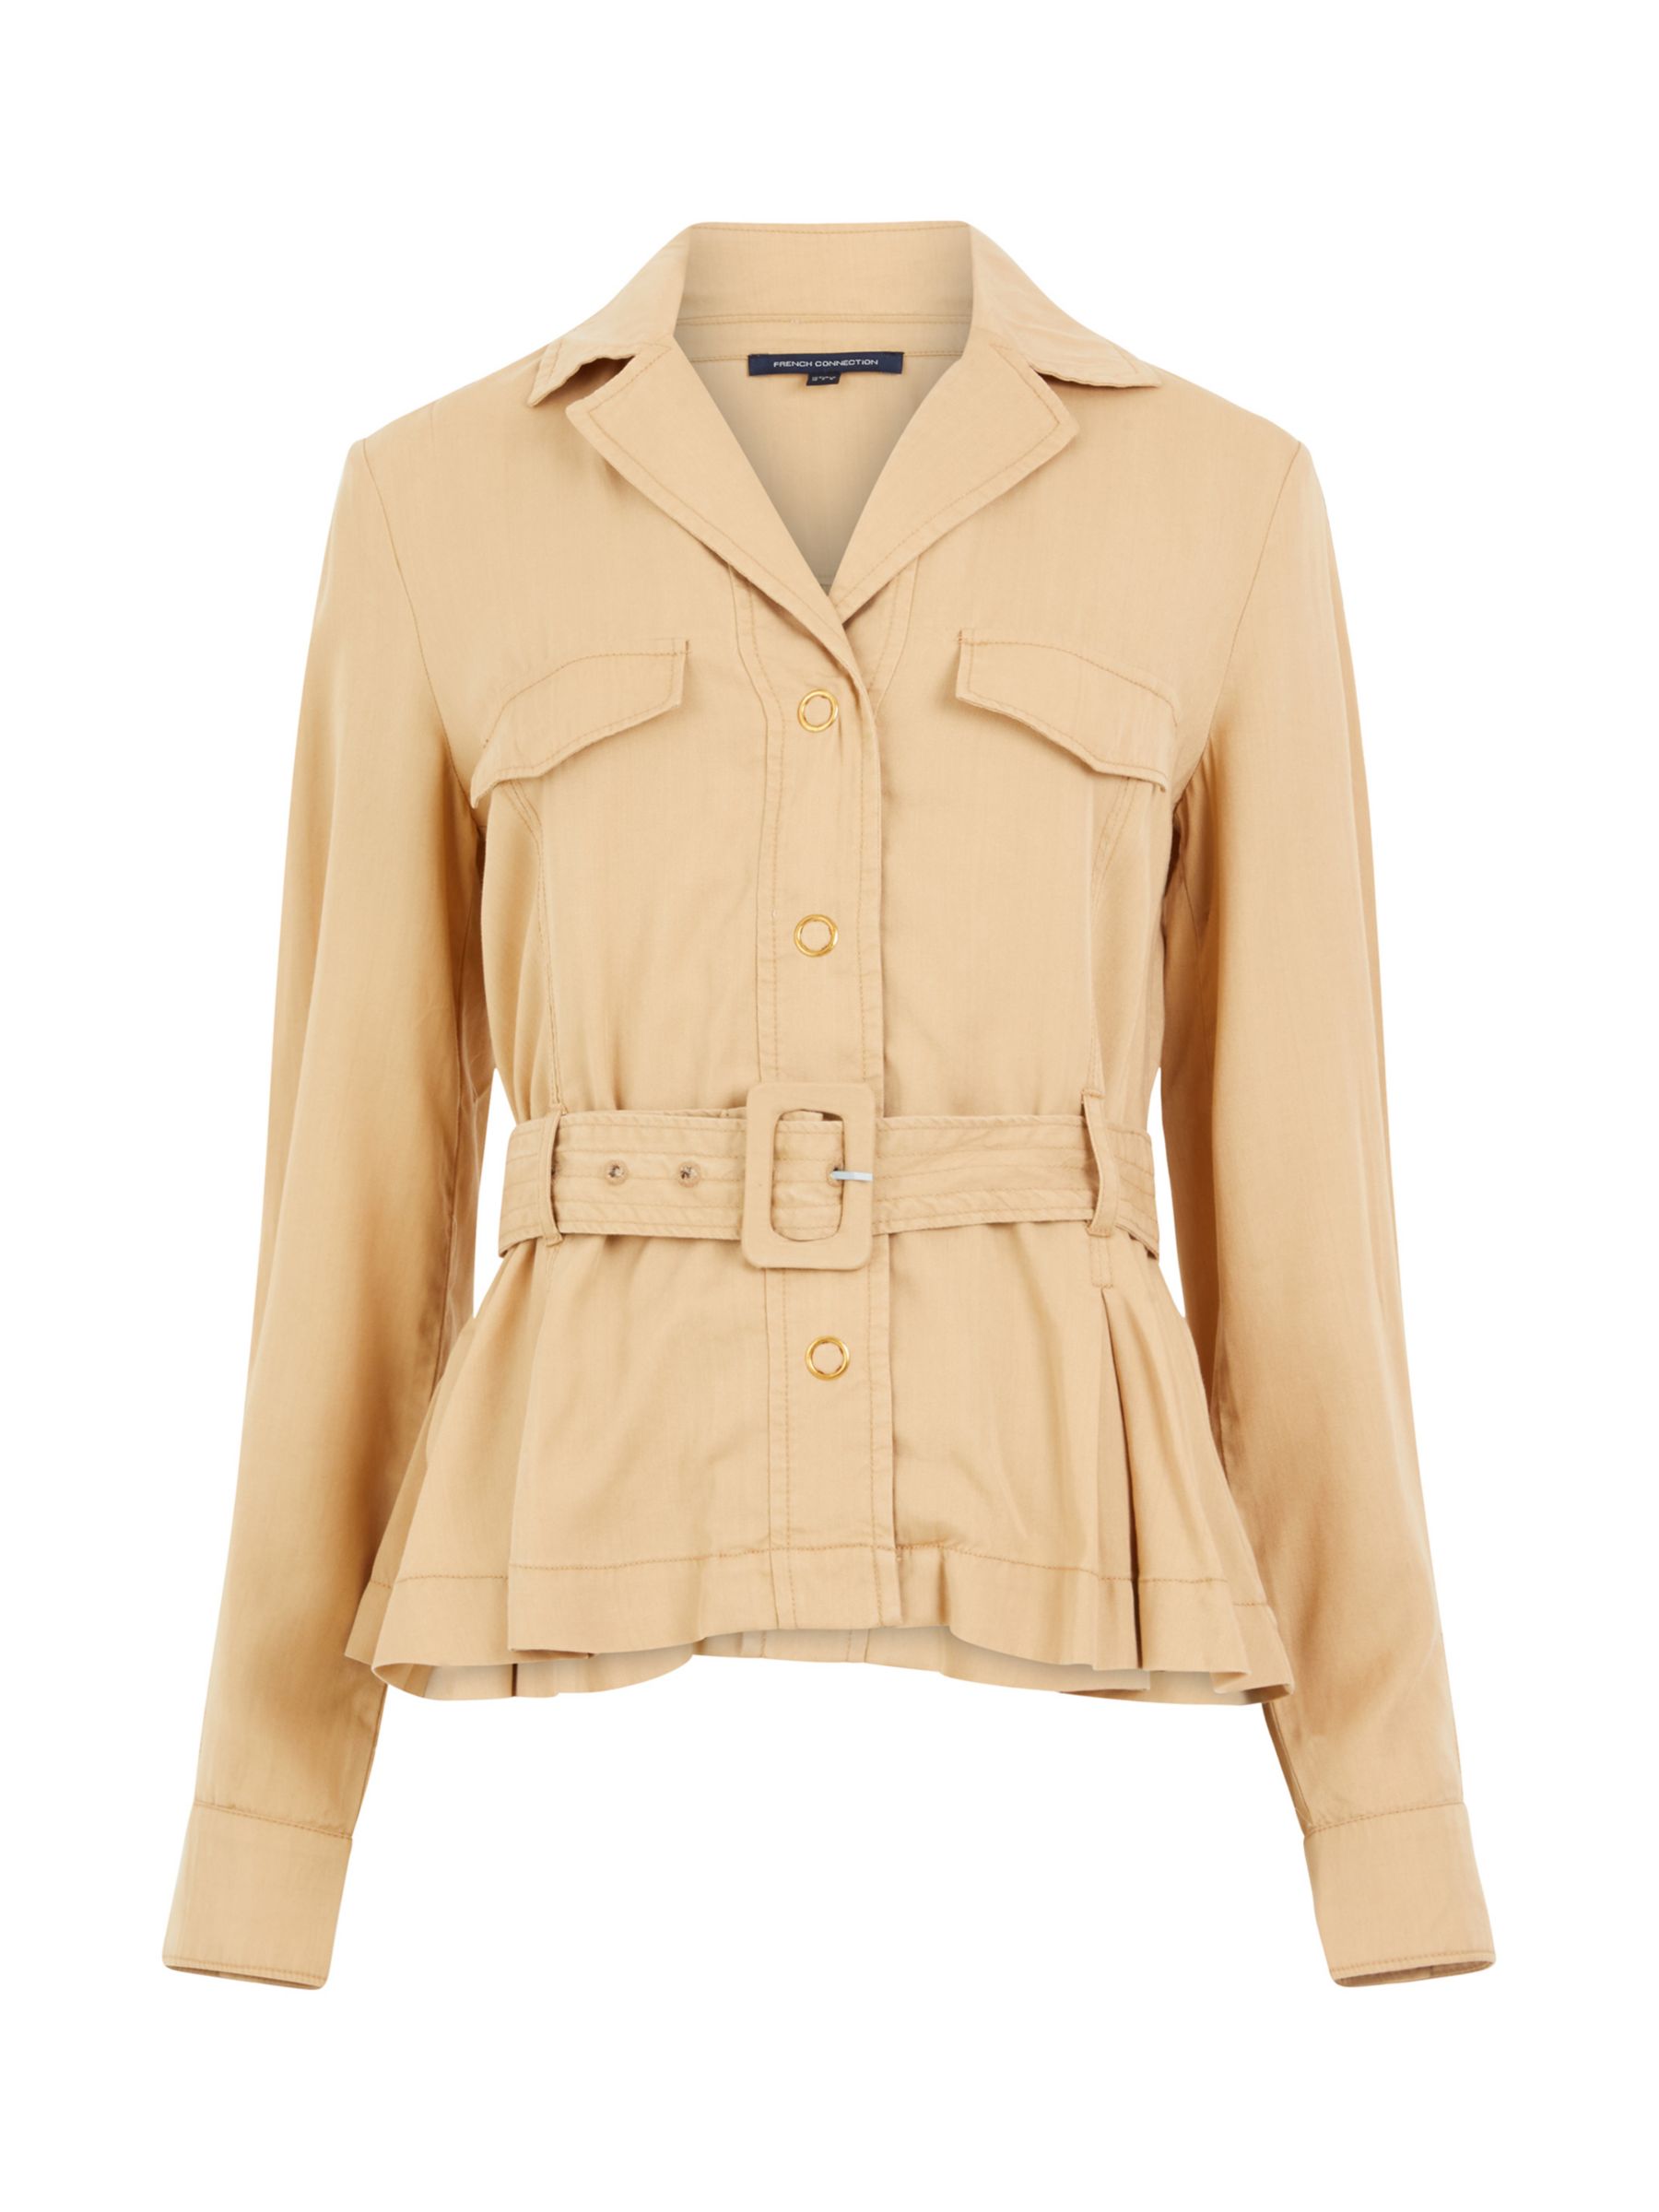 Buy French Connection Elkie Belted Casual Blazer, Biscotti Online at johnlewis.com